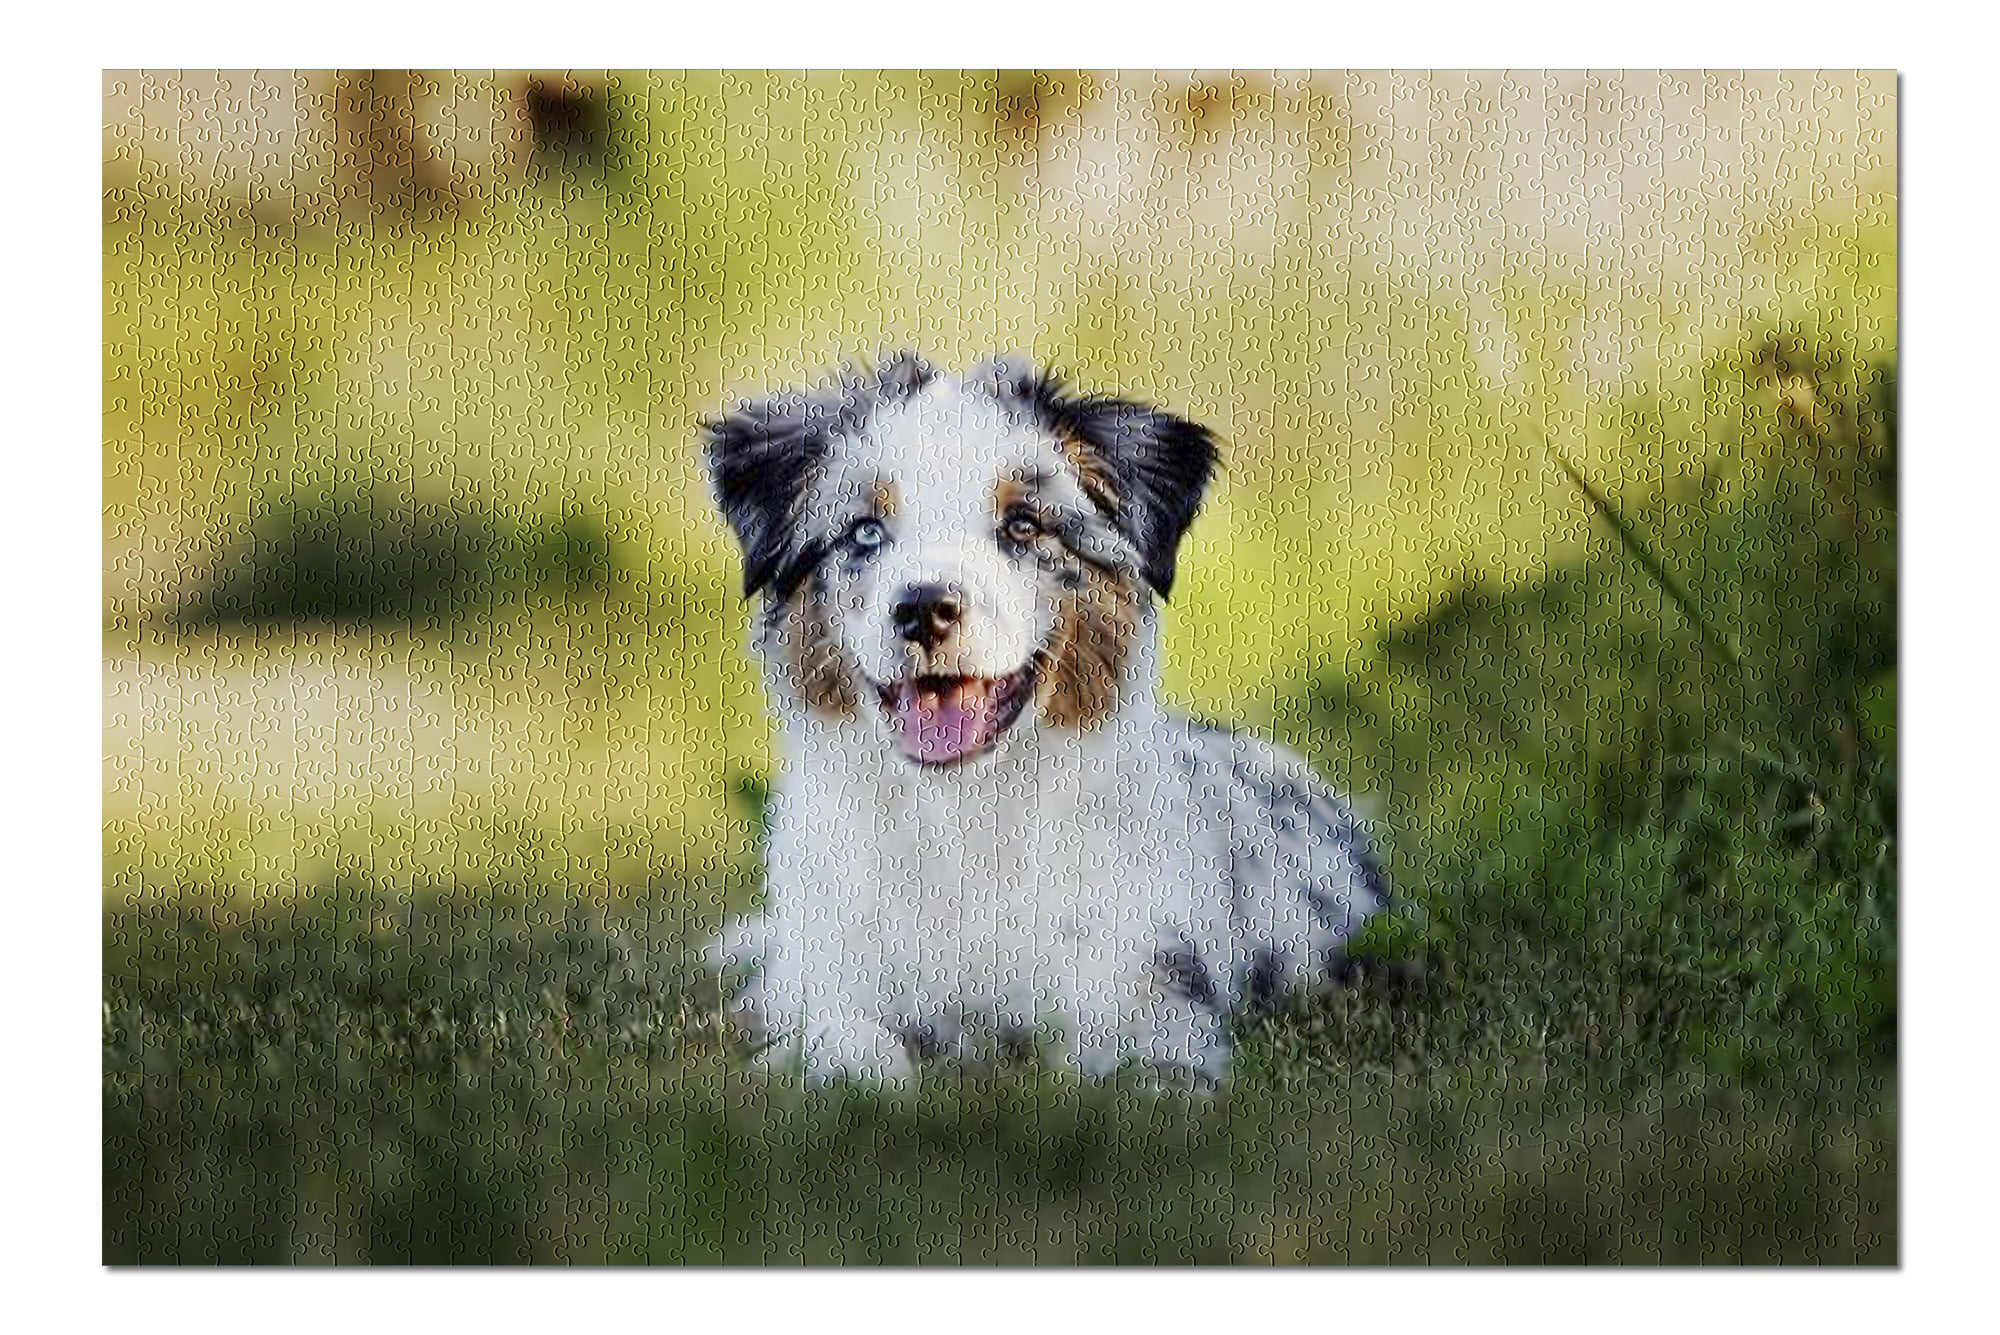 Australian Shepherd Dogs 500 Piece Jigsaw Puzzle Jigsaw Puzzles for Child Adults Home Decor Puzzles for Adults 500 Piece 